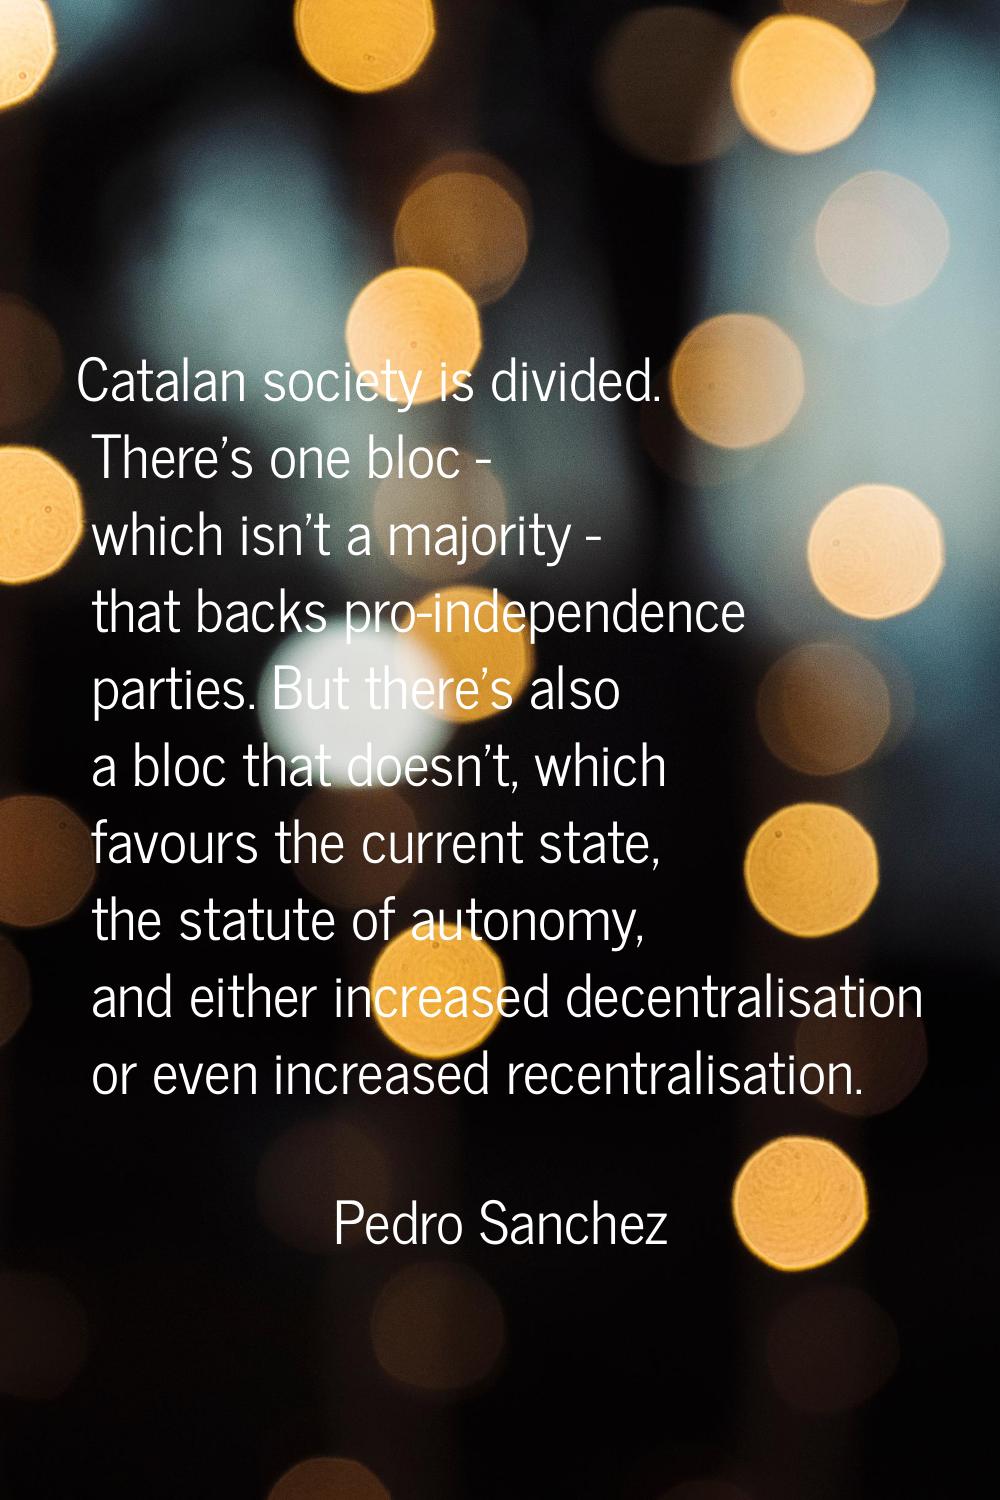 Catalan society is divided. There's one bloc - which isn't a majority - that backs pro-independence